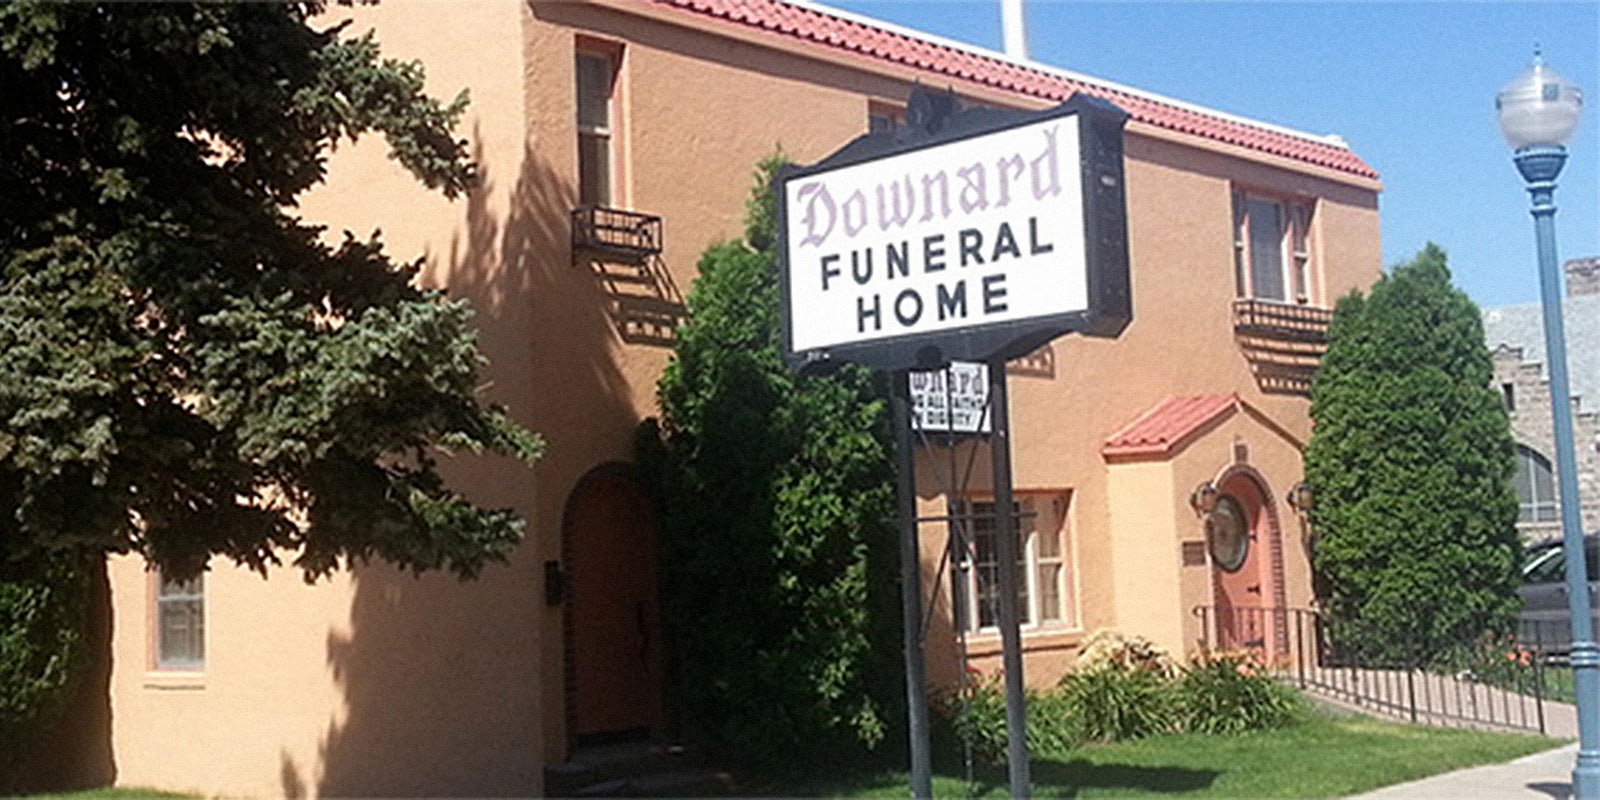 Downard Funeral Home sign outside building